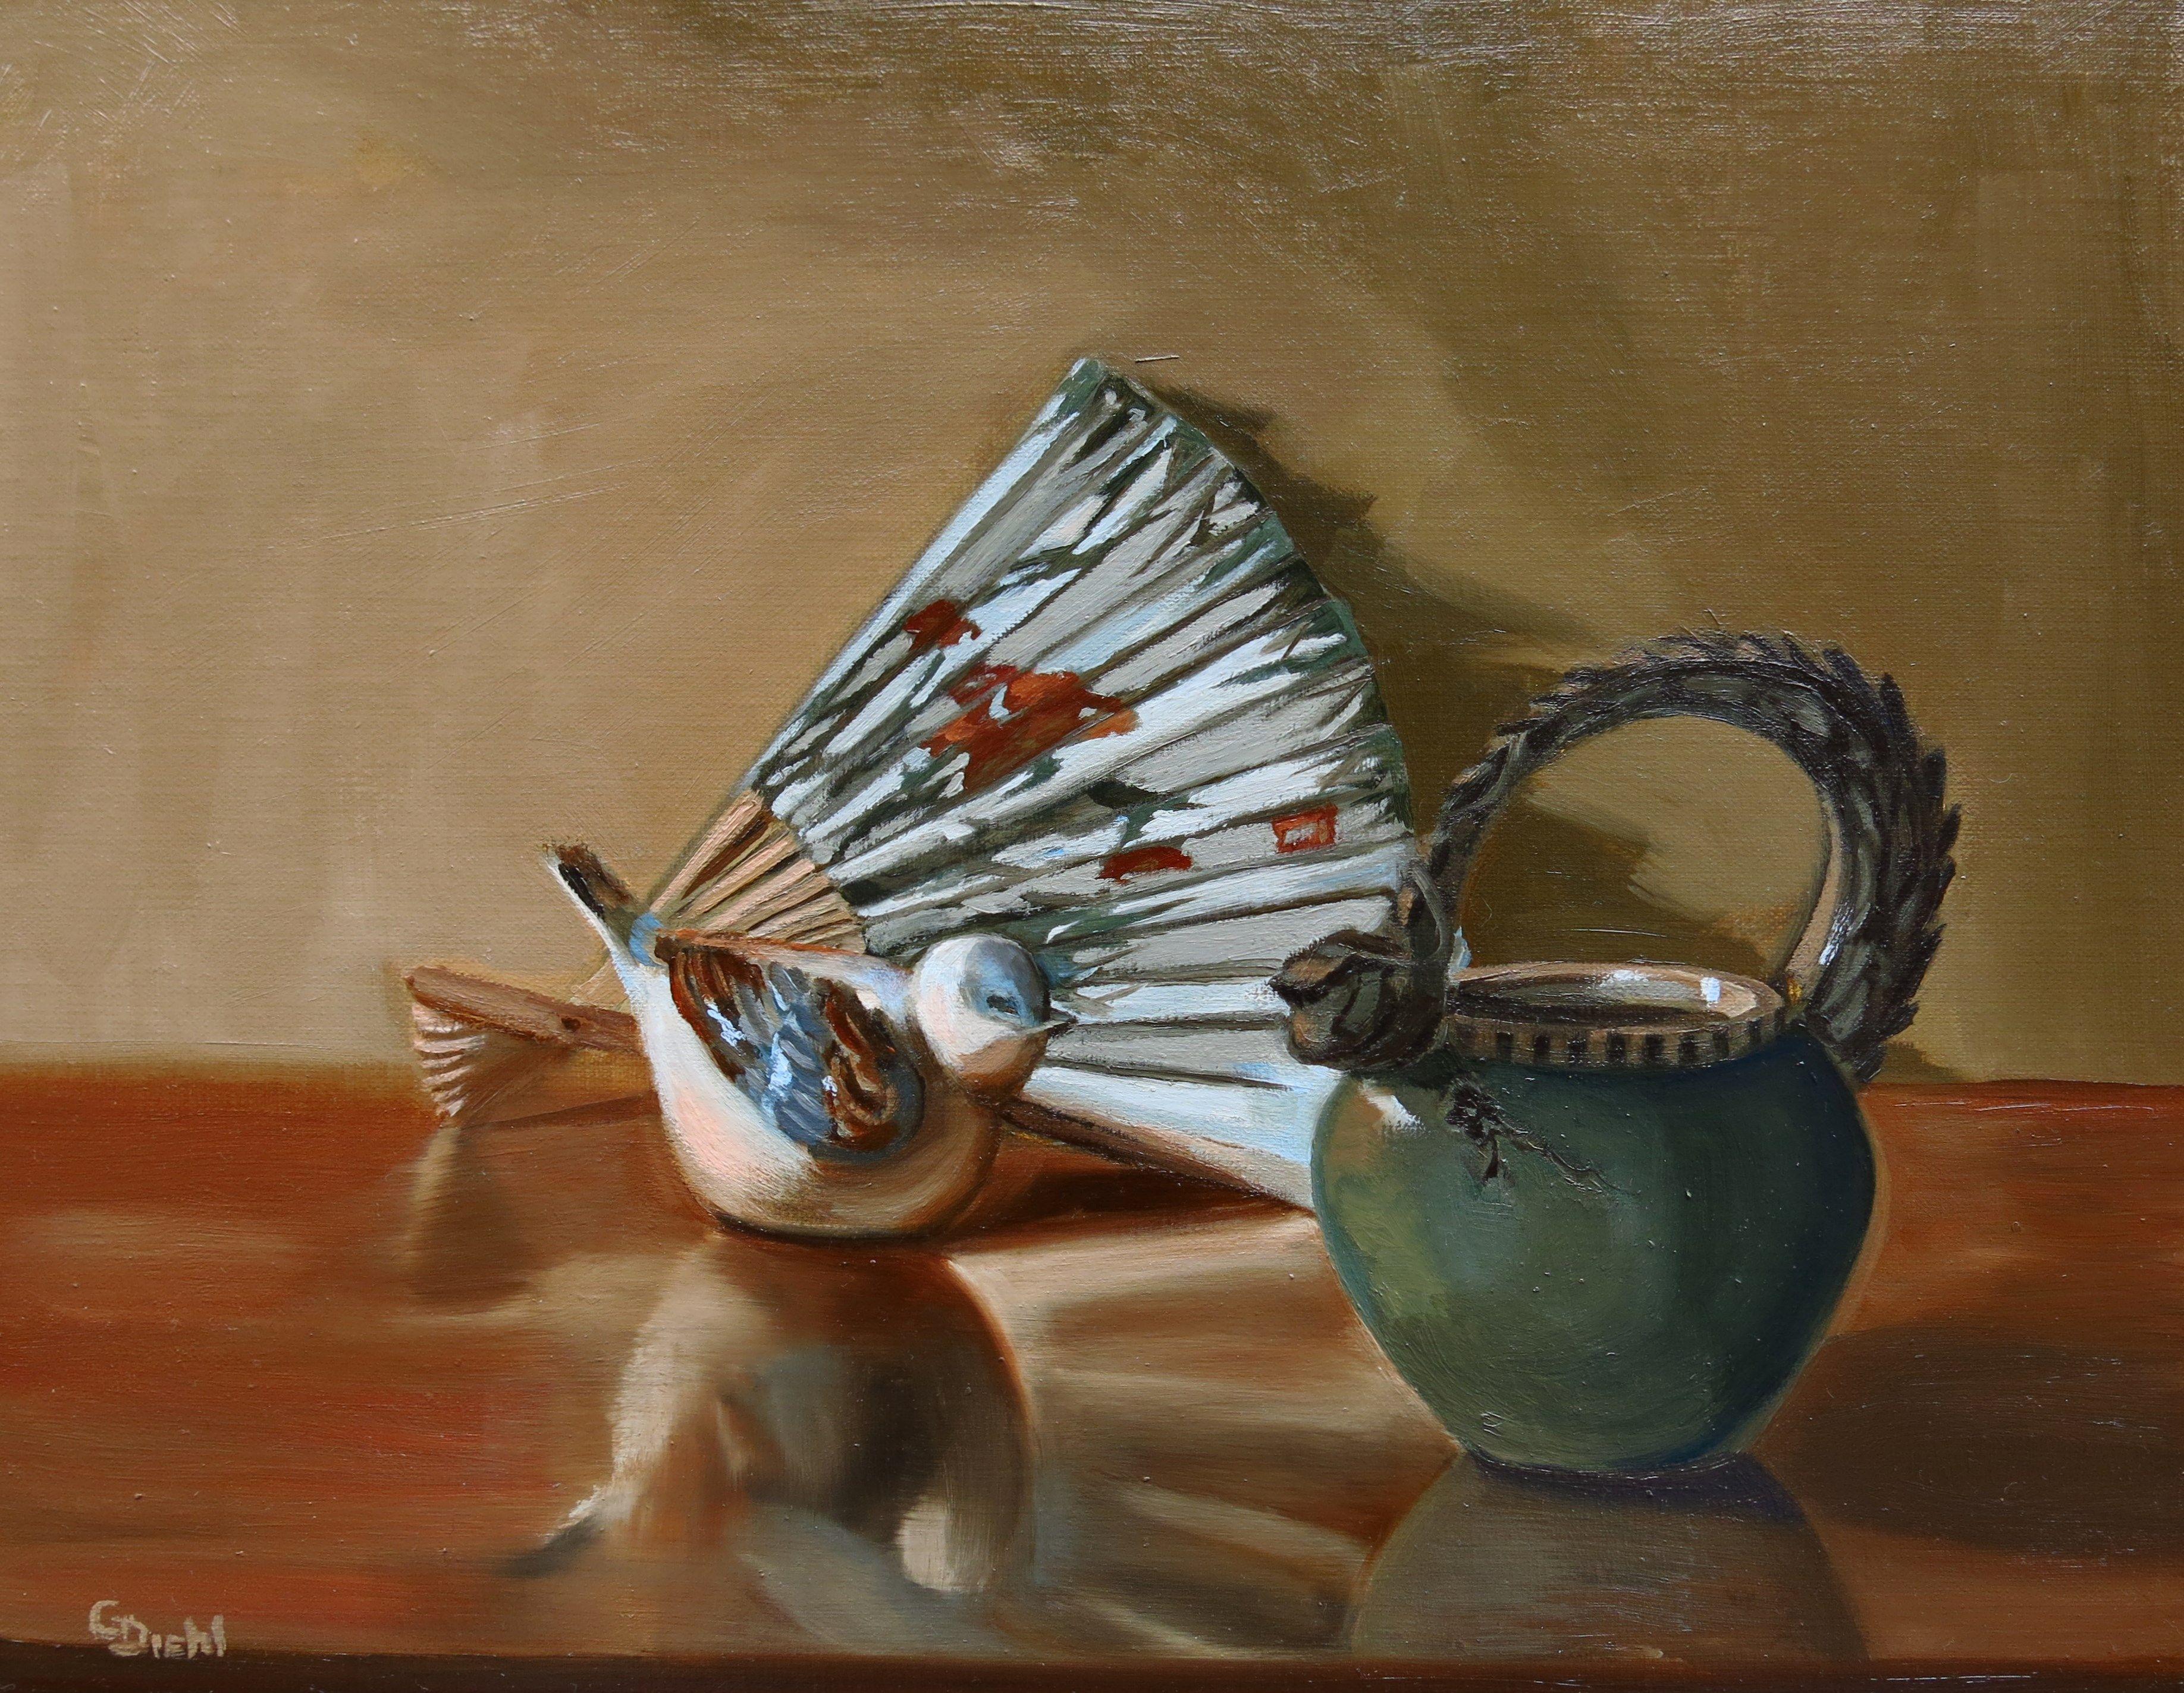 An oriental theme was implied in this composition. The petite pot with the dragon handle, a rose motif colored fan all support this. The porcelain bird's colors tie in with the palate scheme. From the positioned studio lamp, subjects' forms are